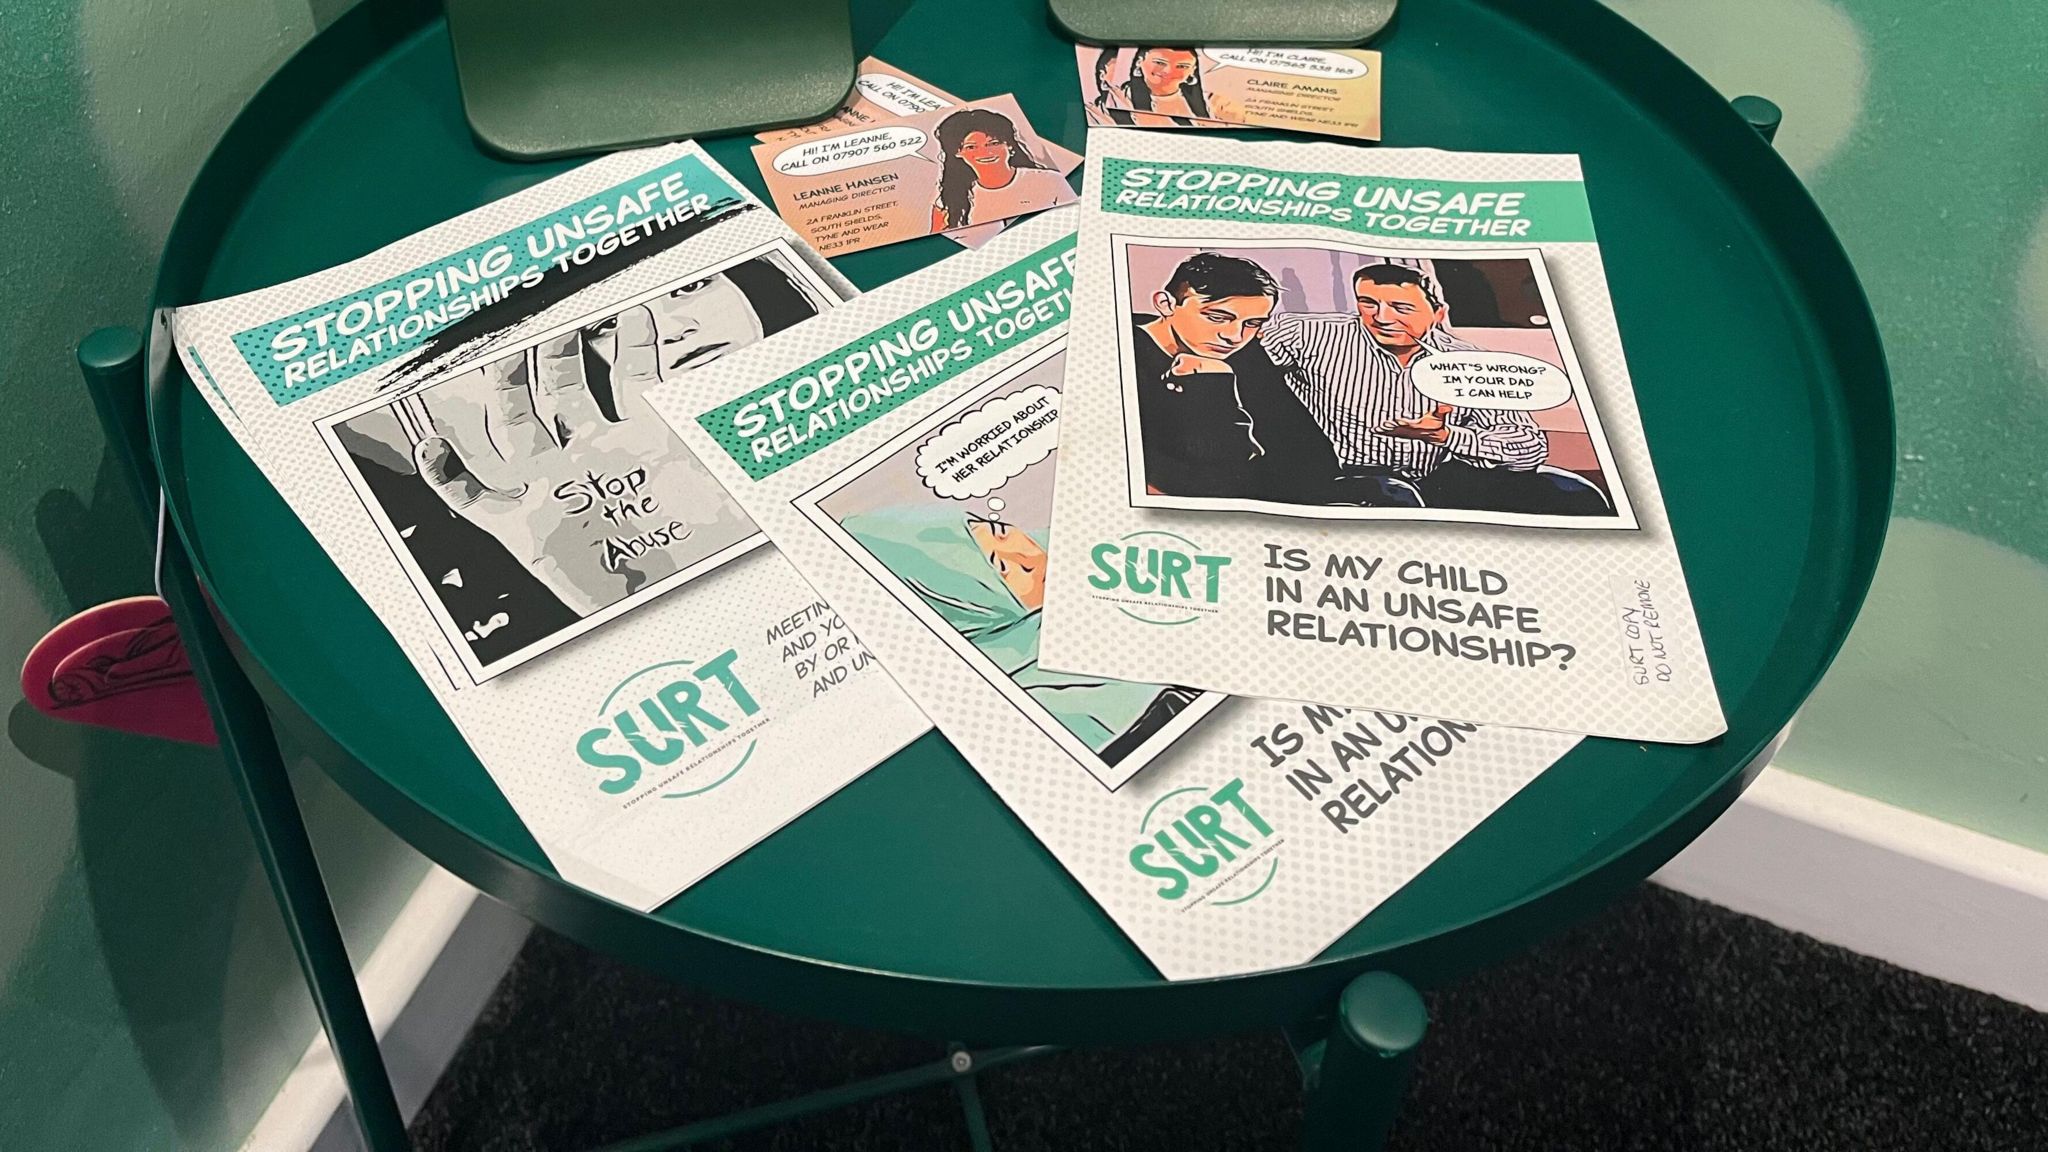 Leaflets laid out on a green coffee table offering advice on stopping unsafe relationships